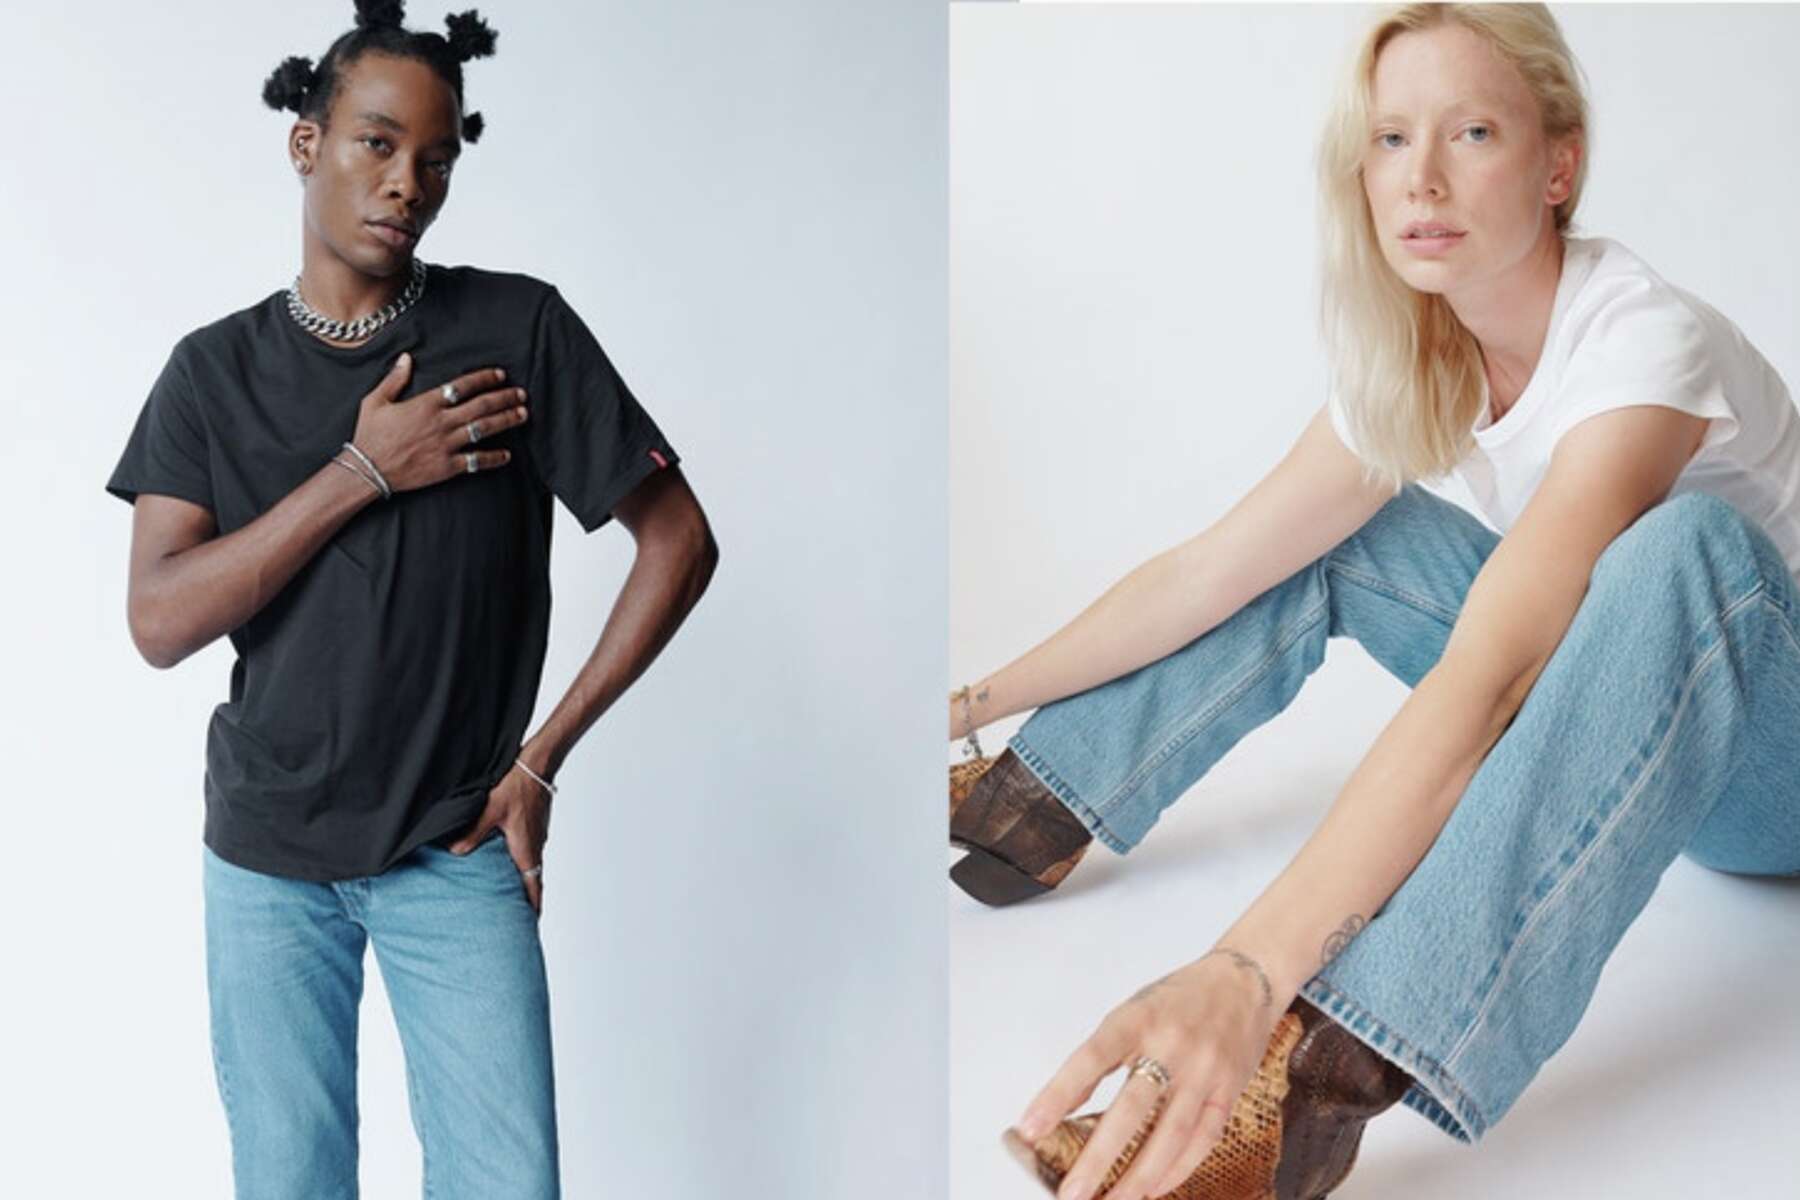 Get your best fitting jeans for 30% off during Levi's Friends & Family sale